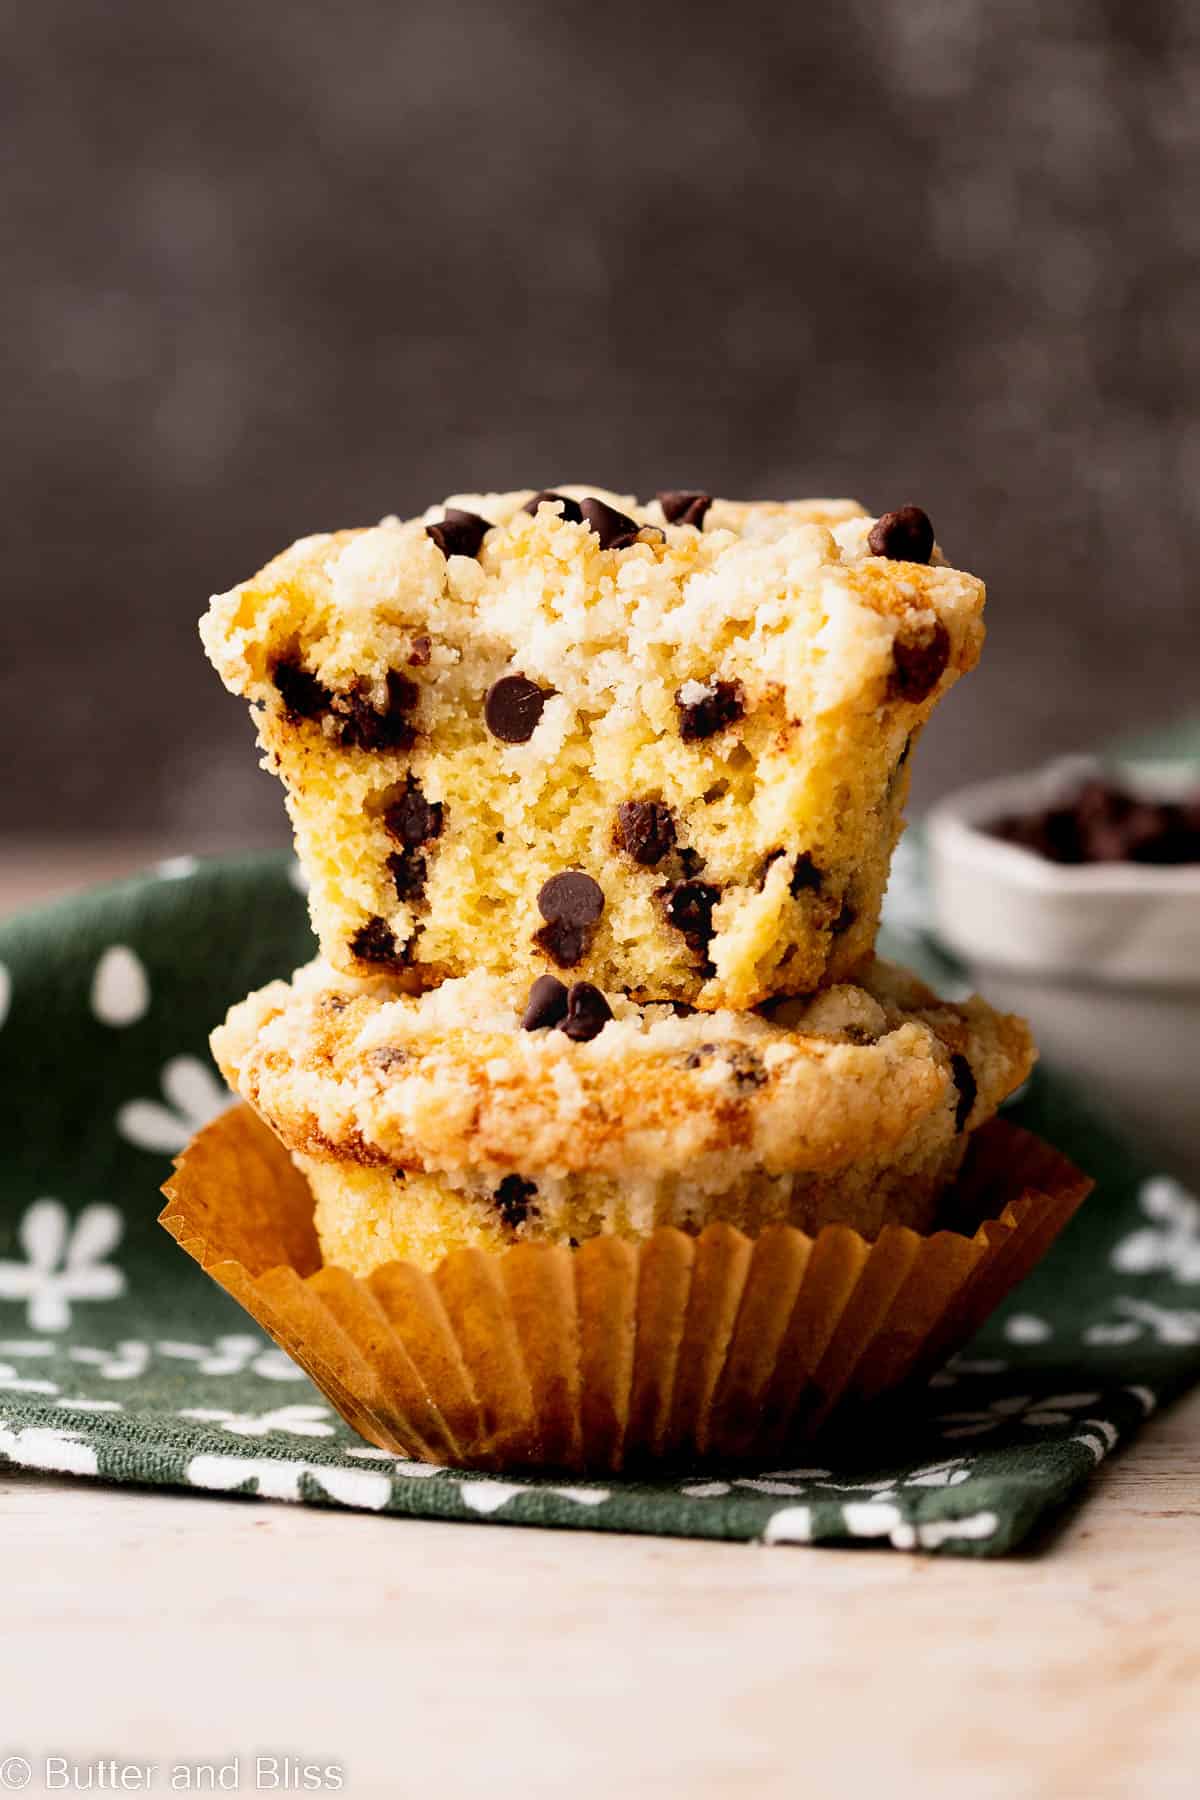 Soft inside of a chocolate chip gluten free muffins dotted with tons of chocolate chips.